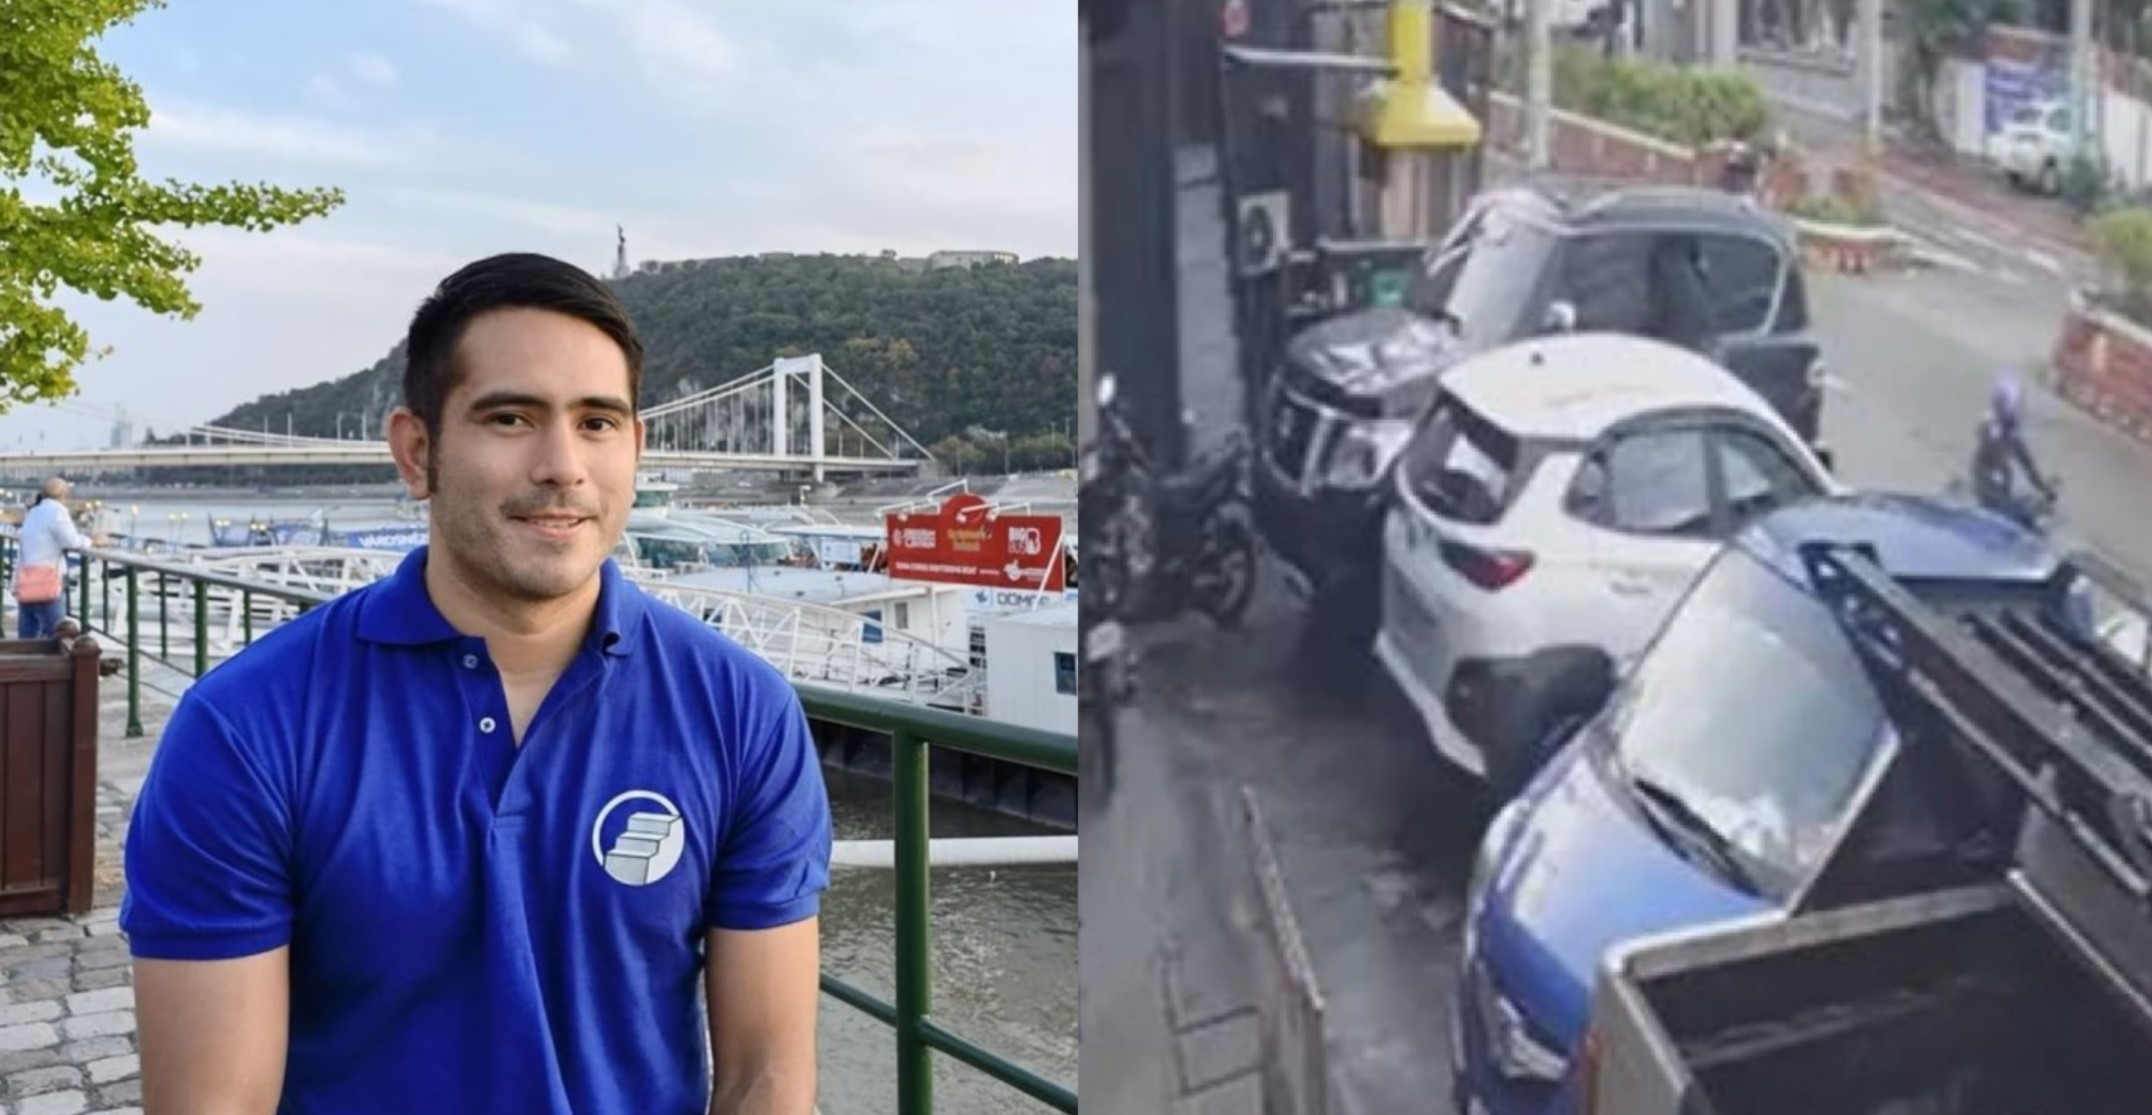 Gerald Anderson Falls Victim to "Bukas-Kotse" Modus—His Gadgets, Jewelry, Cards, and IDs Stolen